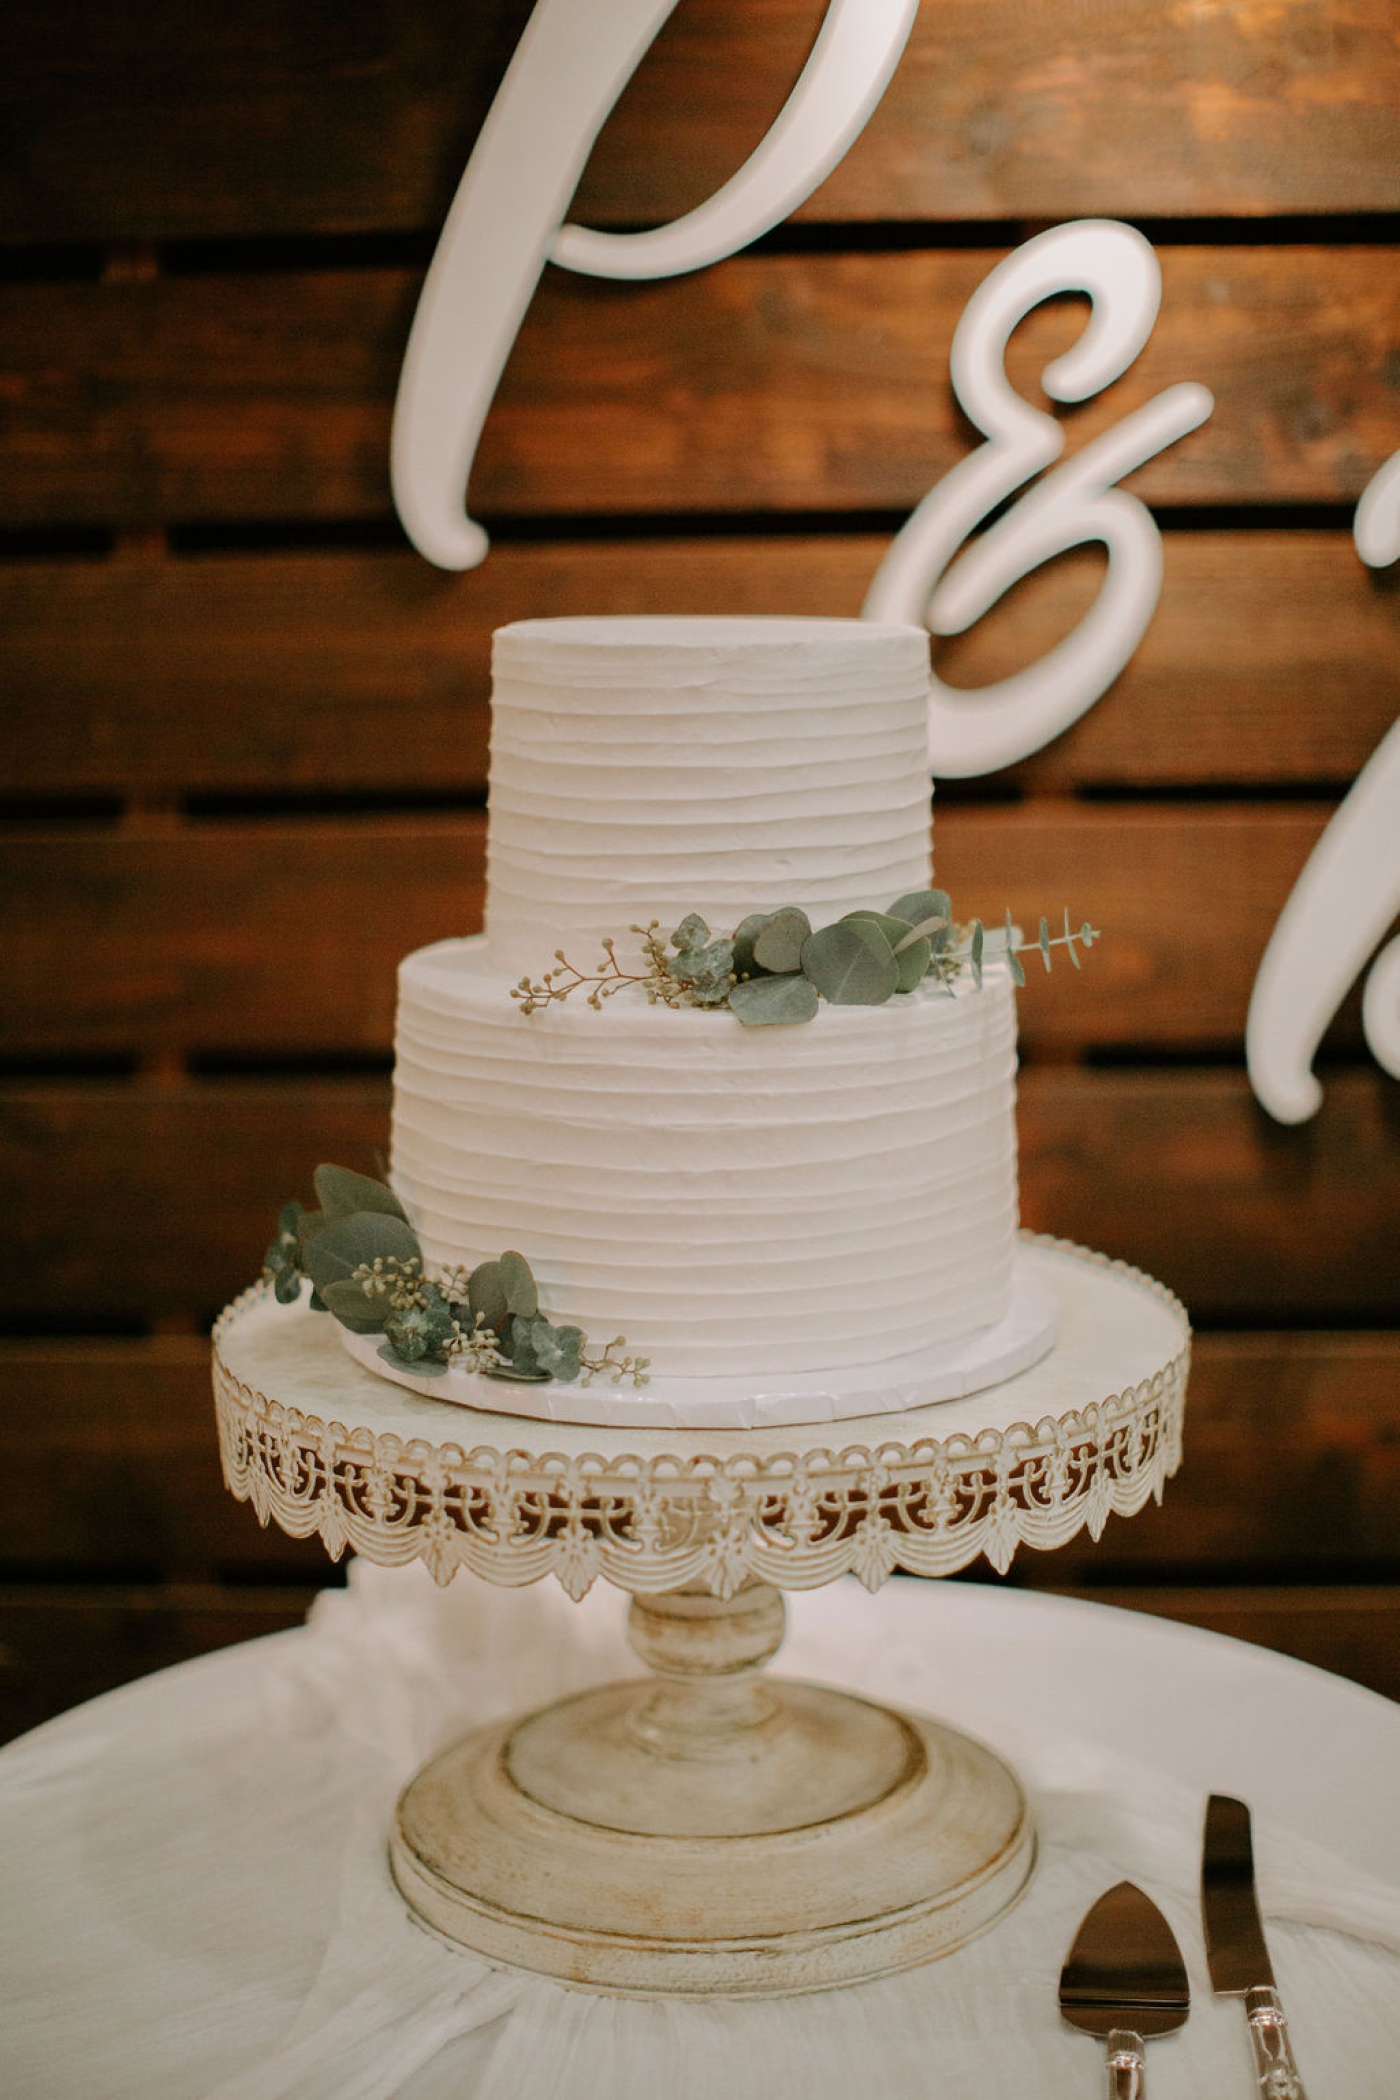 The best ways to display your wedding cake.